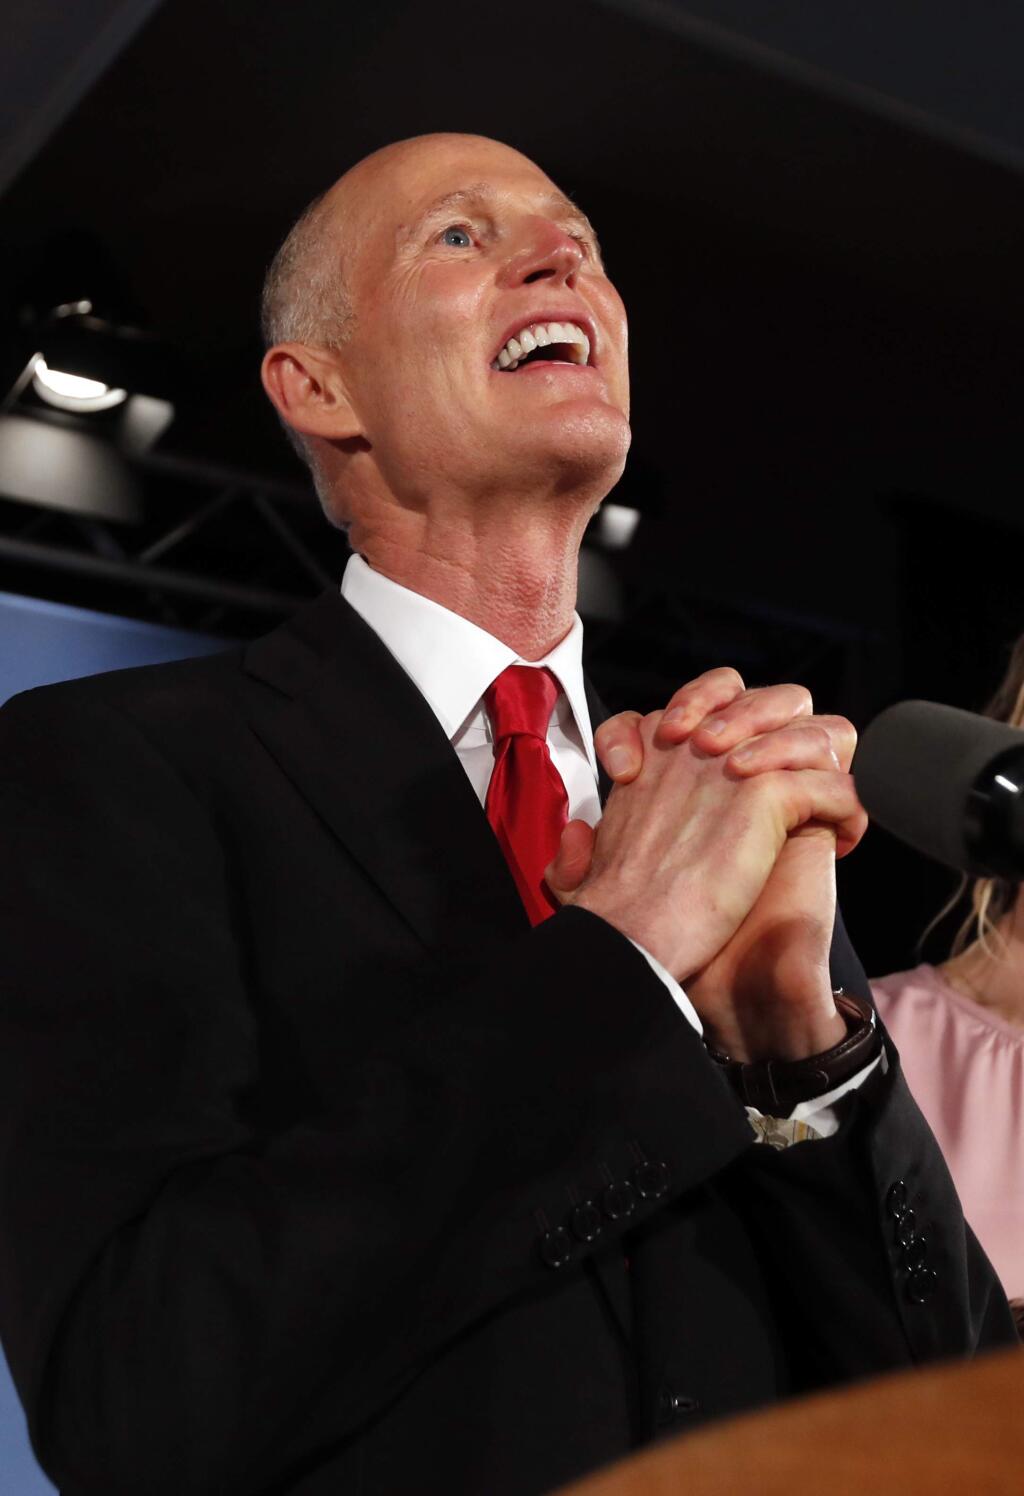 Republican Senate candidate Rick Scott speaks to supporters at an election watch party, Wednesday, Nov. 7, 2018, in Naples, Fla. (AP Photo/Wilfredo Lee)